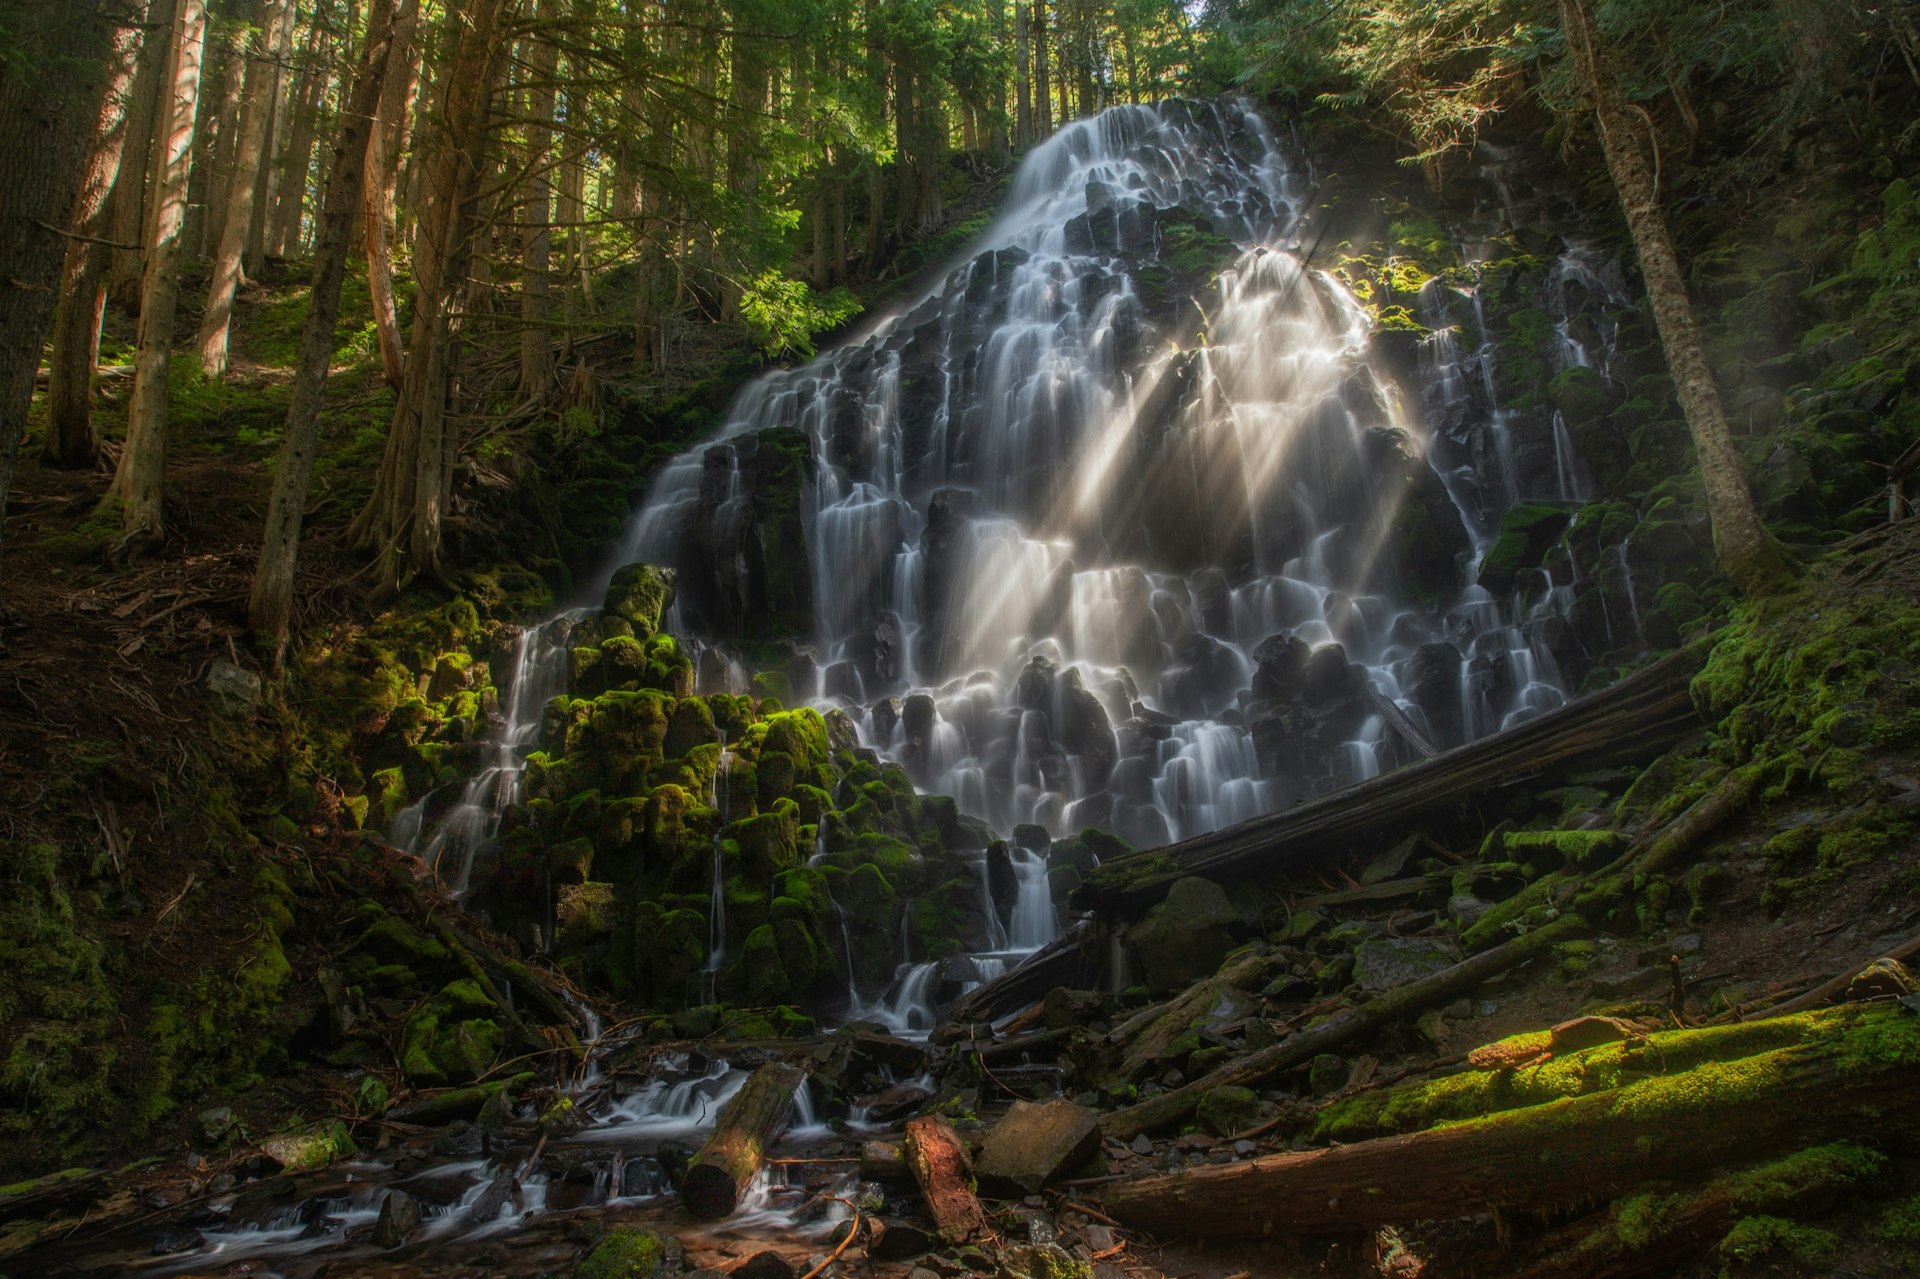 A wide waterfall rolls over a wooded hill in a forest near Portland, oregon